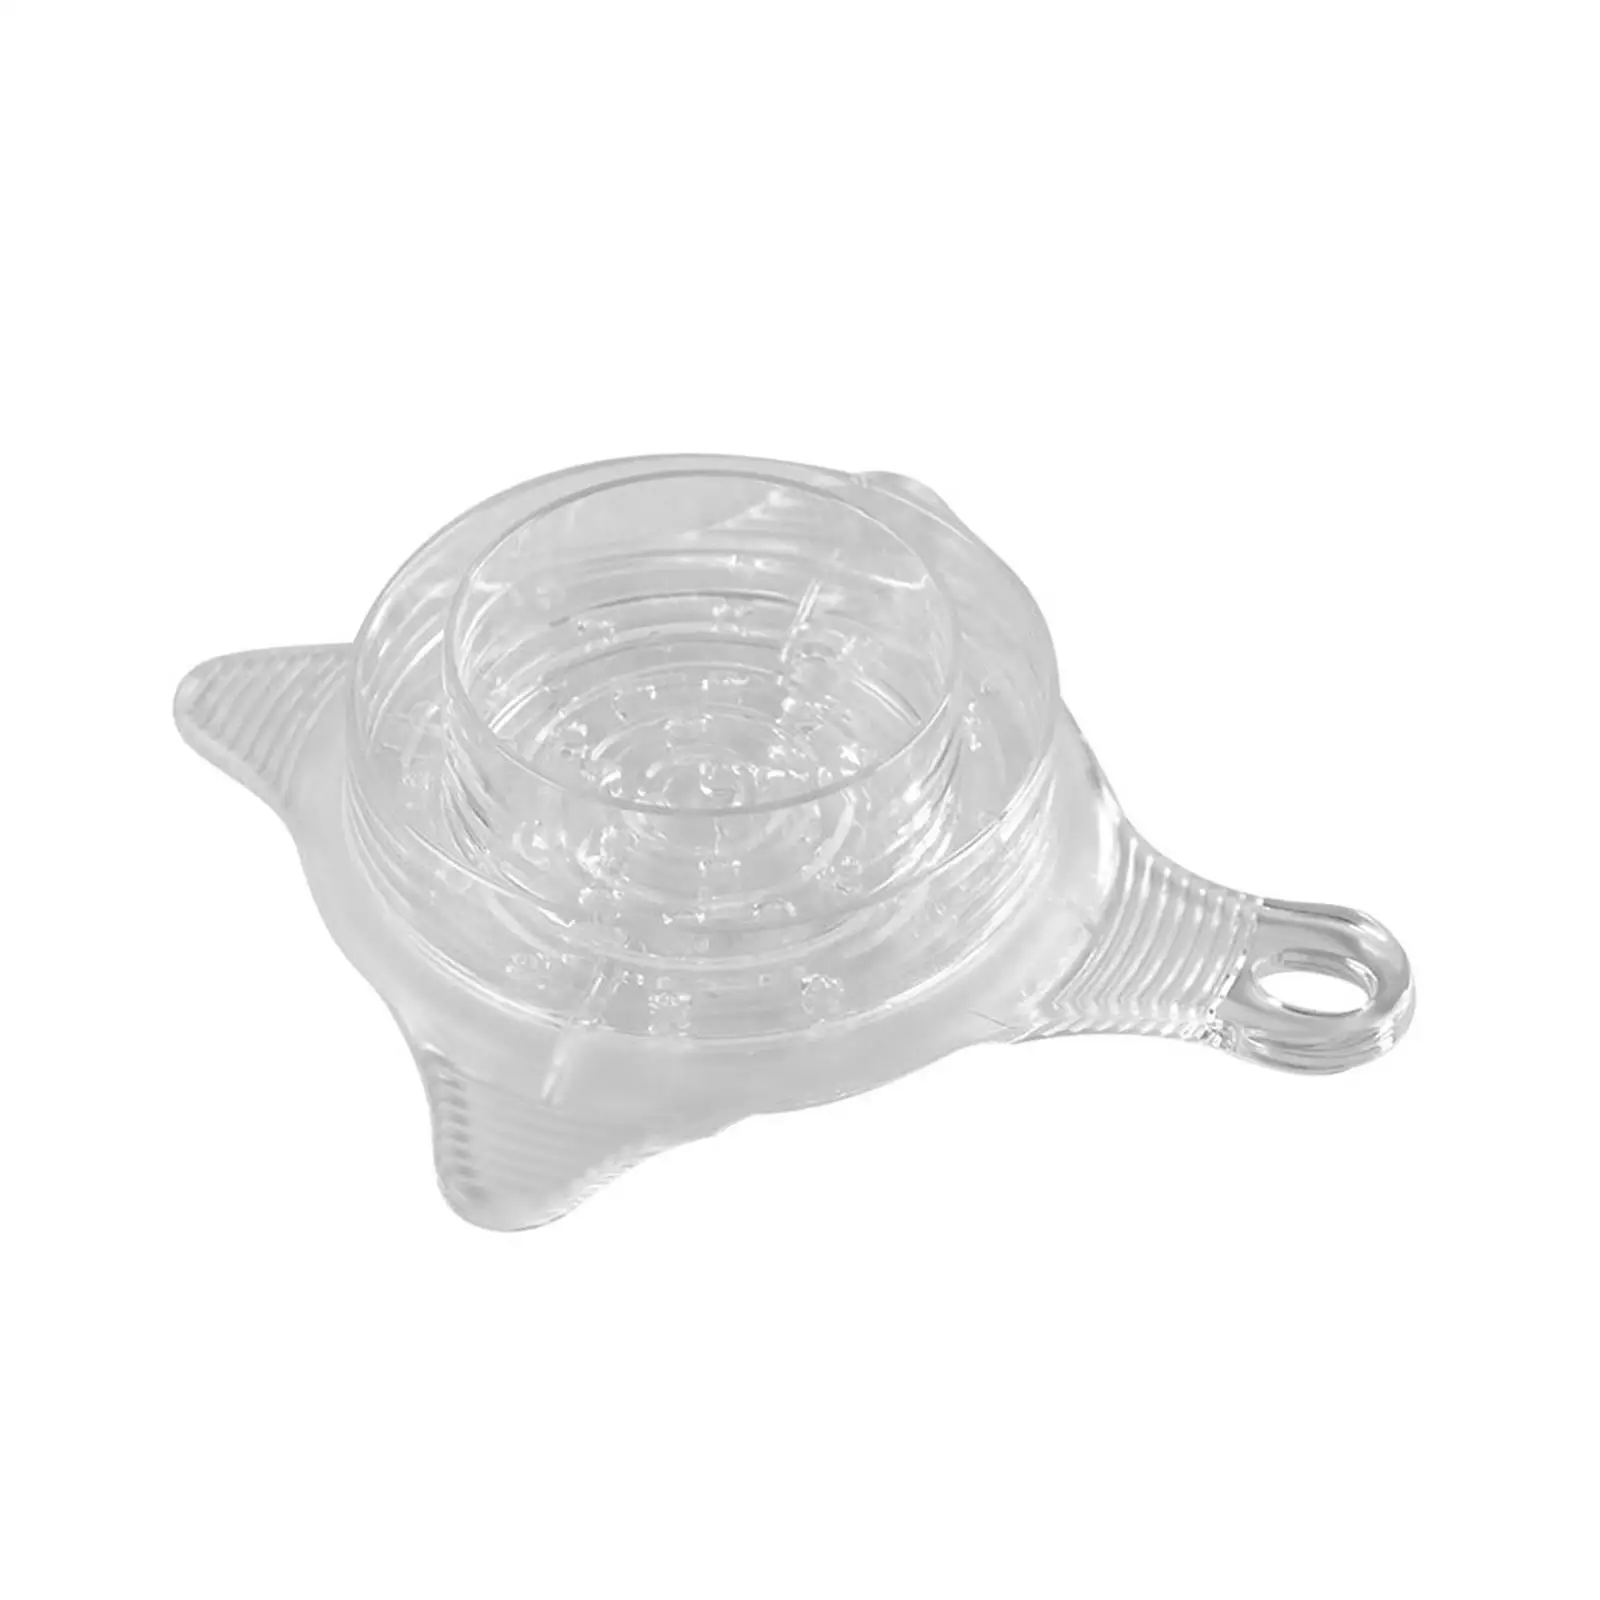 Coffee Filter Transparent Accessory Practical Portable Reusable Coffee Portafilter For Camping Home Office Utensils